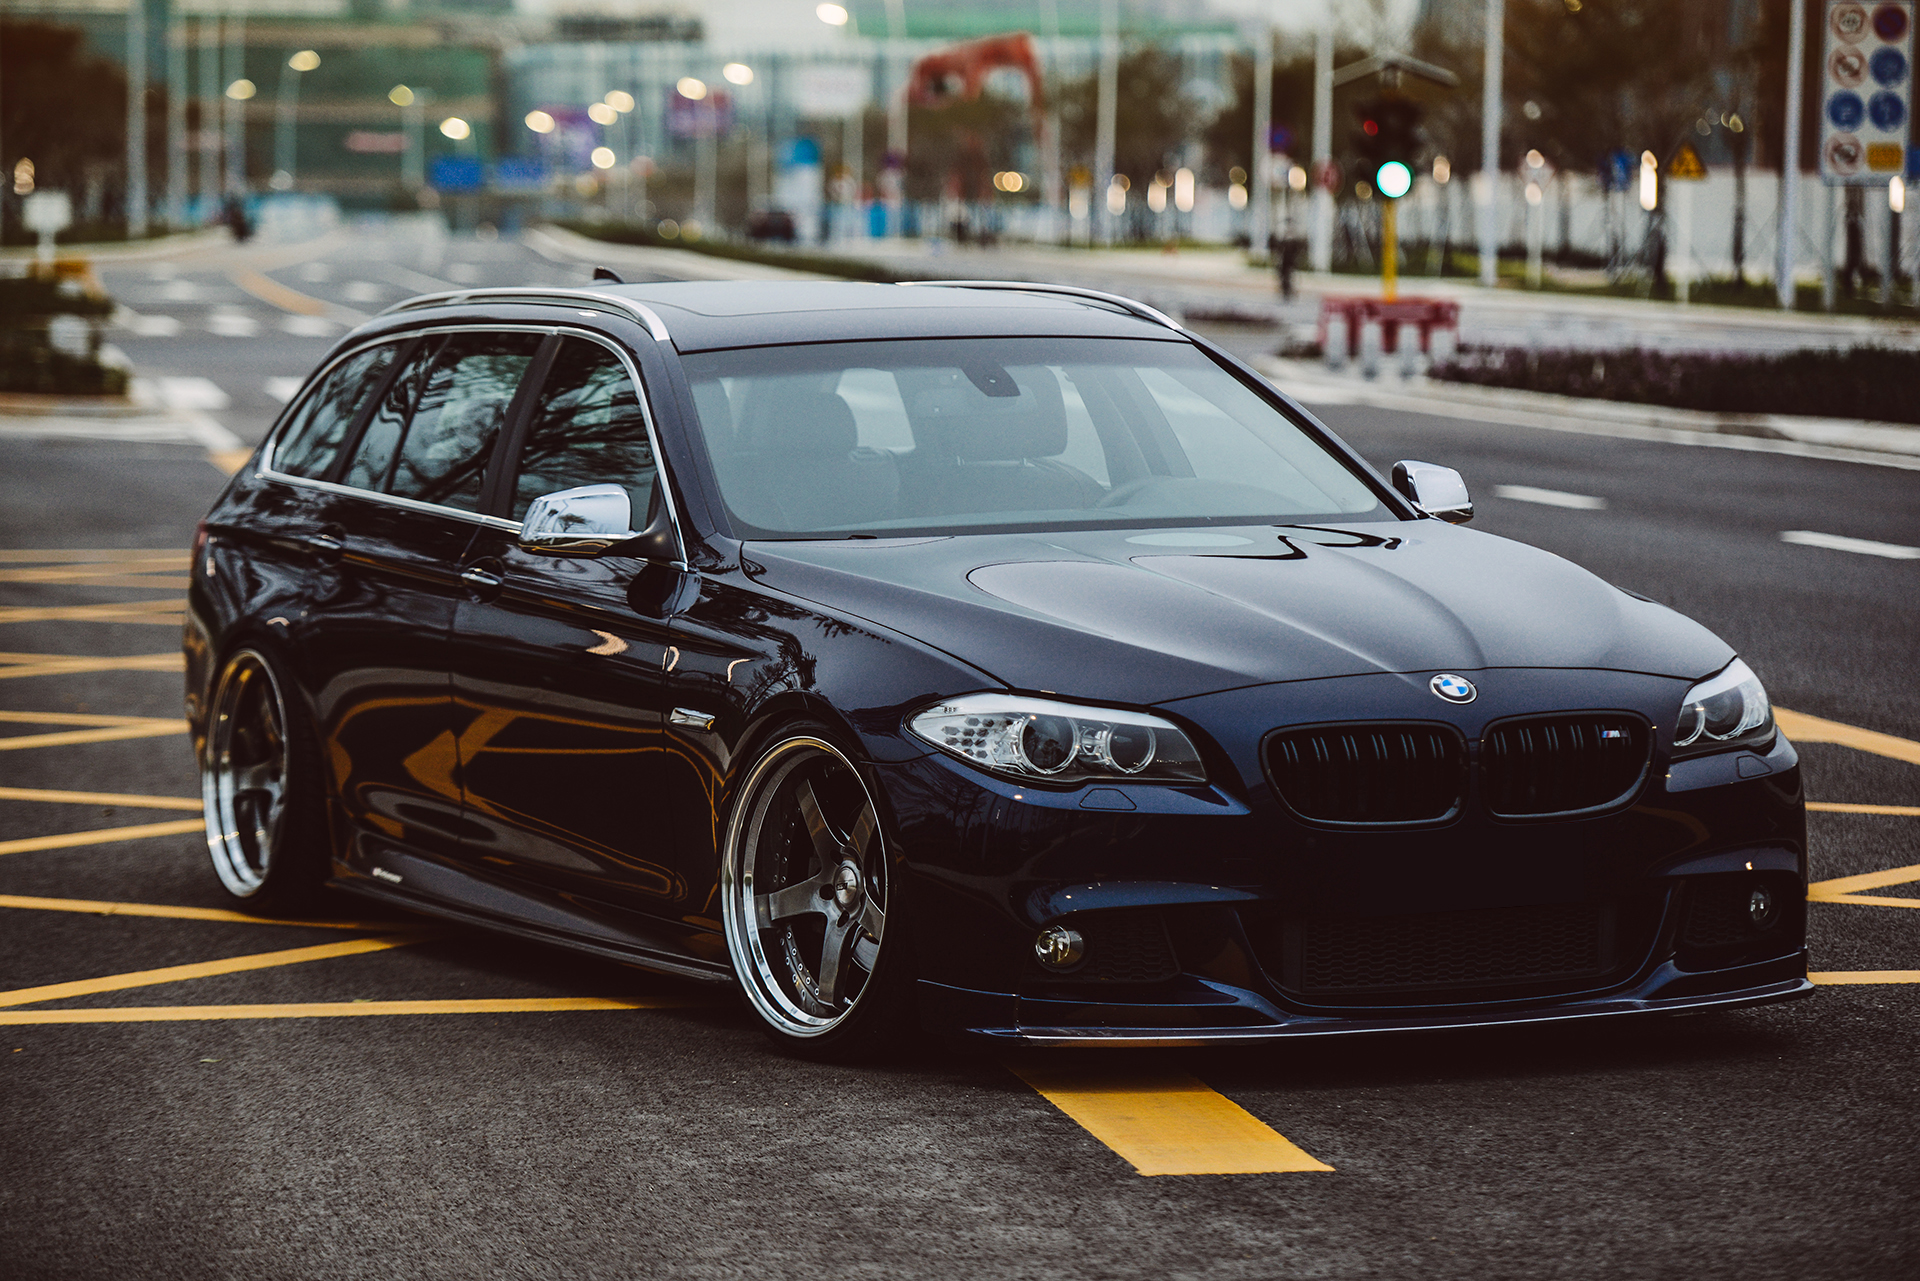 F11 Touring with 3D Design front lip. - 2010 2011 BMW 5 Series